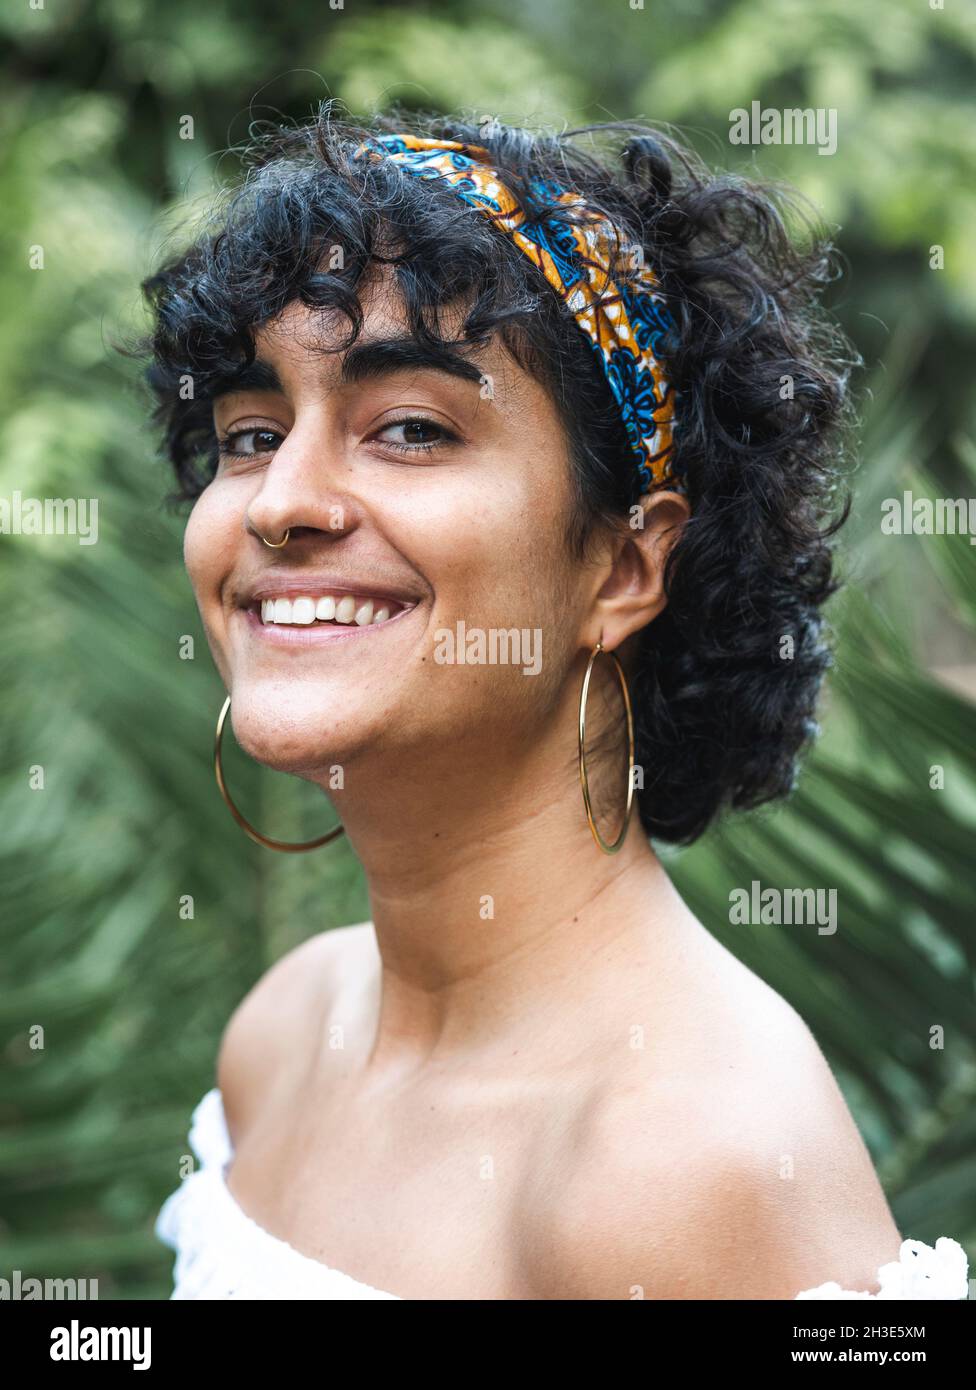 Cheerful charming ethnic female in headband on curly hair looking at camera  in green summer garden Stock Photo - Alamy